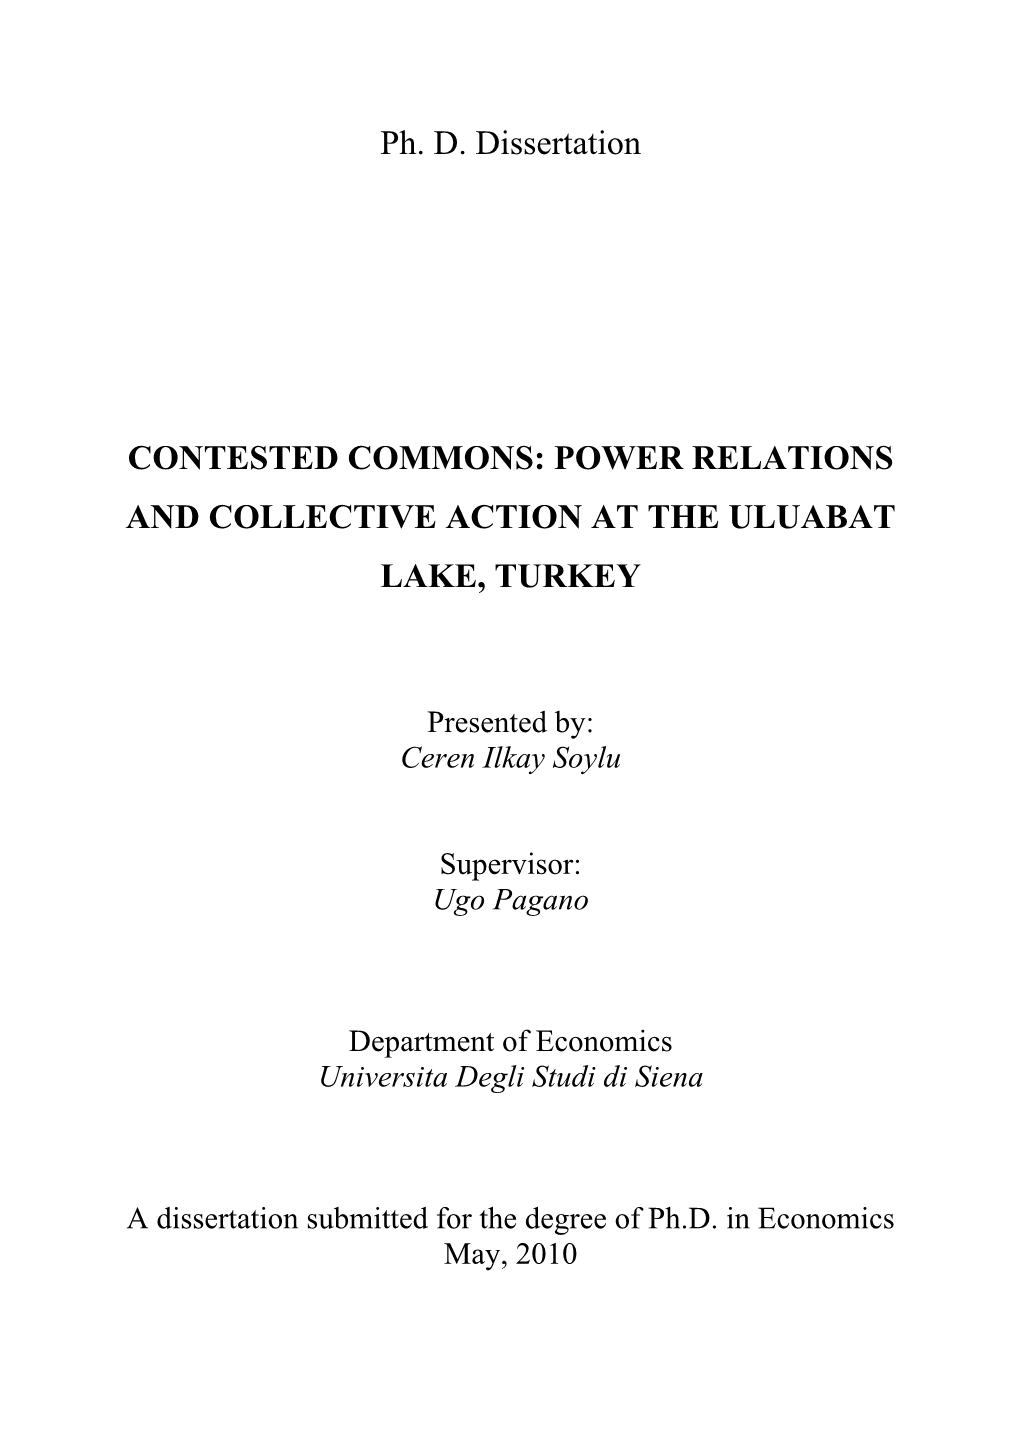 Power Relations and Collective Action at the Uluabat Lake, Turkey